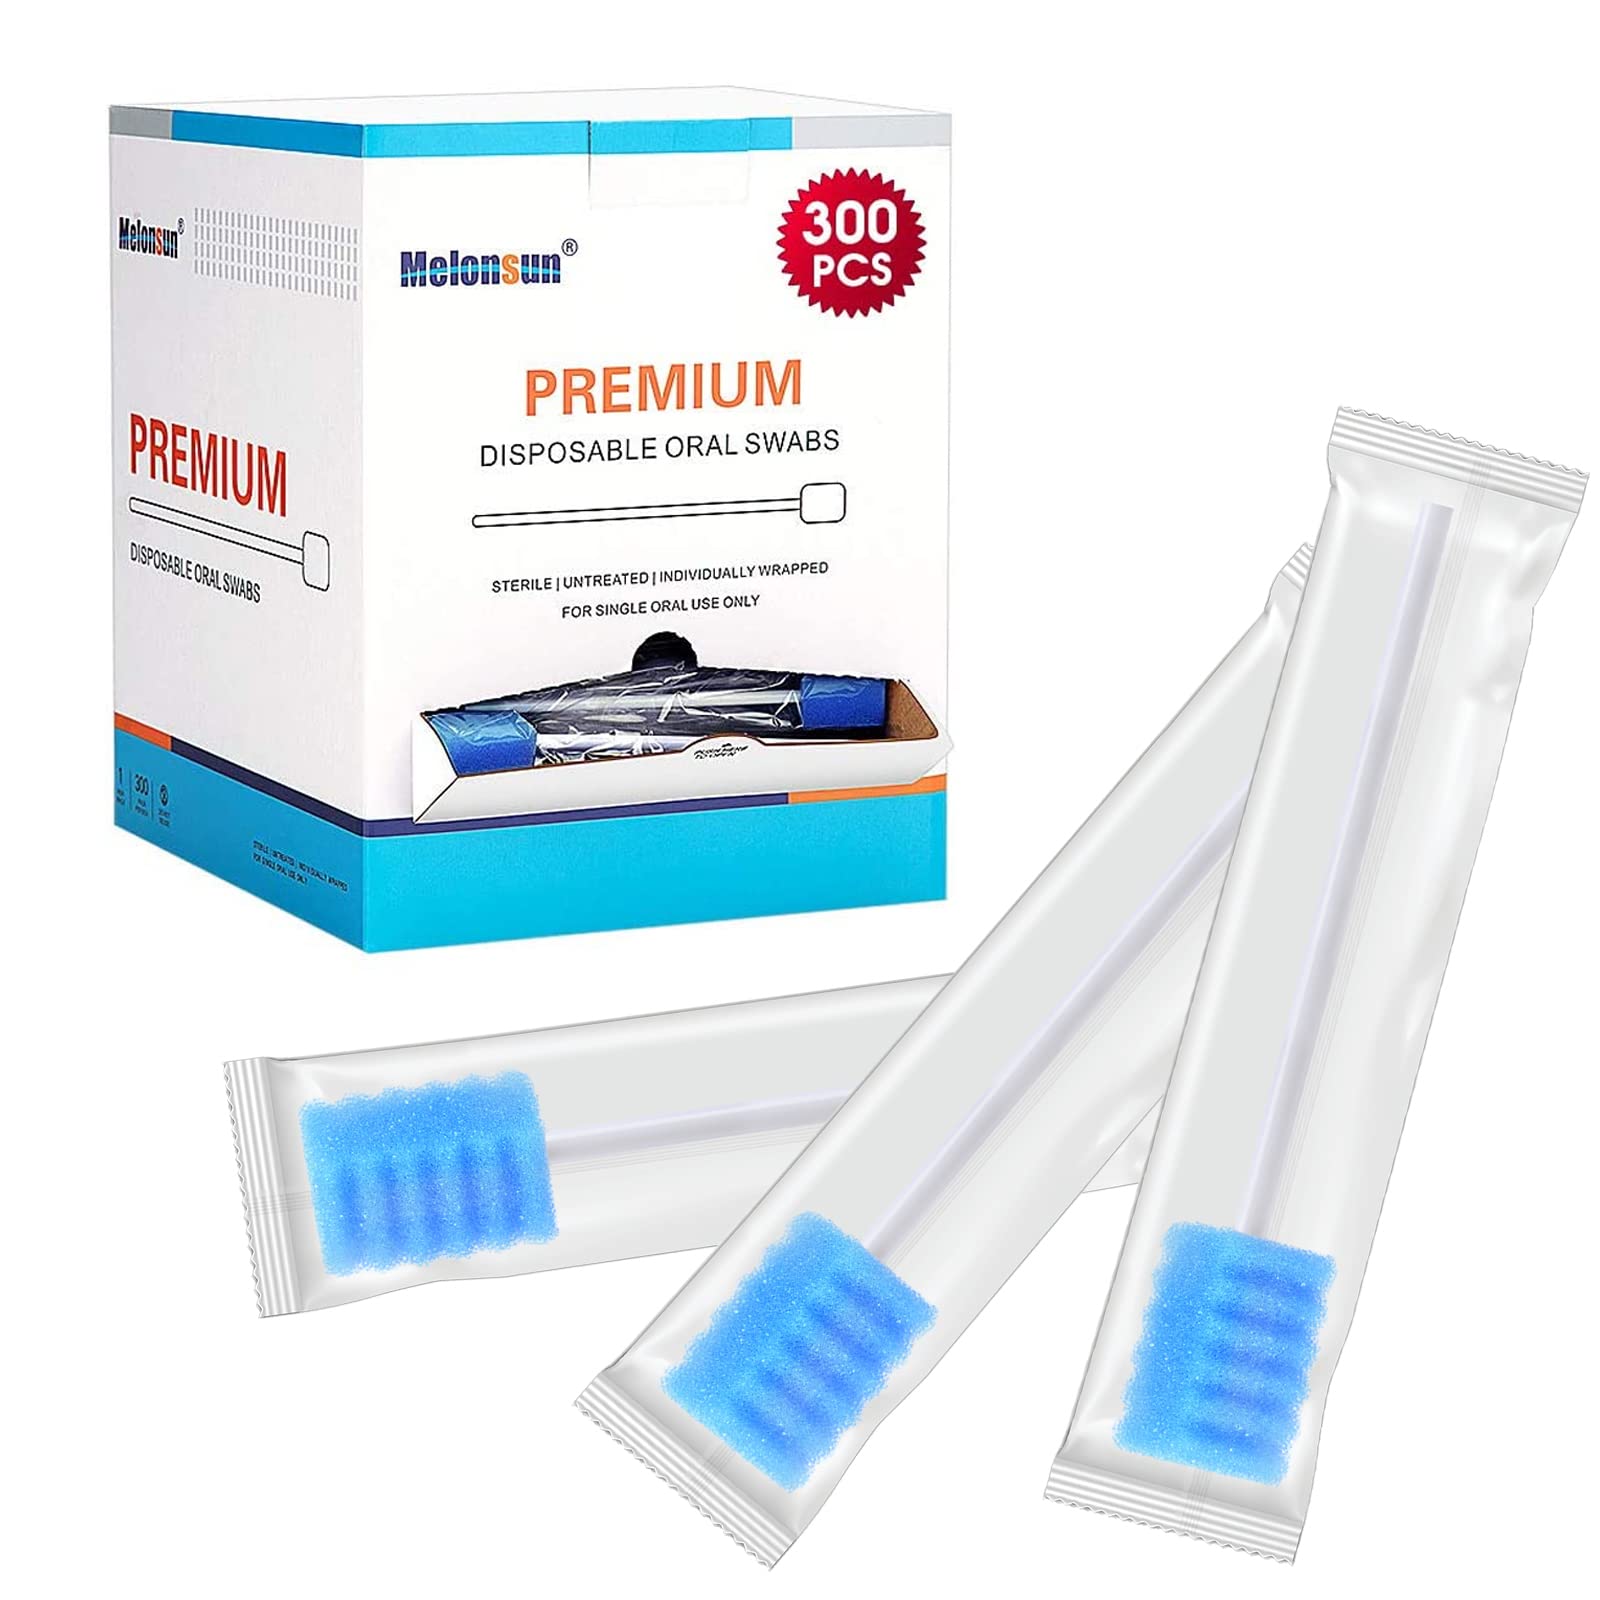 300 Pcs Oral Swabs-Unflavored & Sterile Disposable Dental Swabsticks for Mouth Cleaning- Individually Wrapped (Dental Blue)